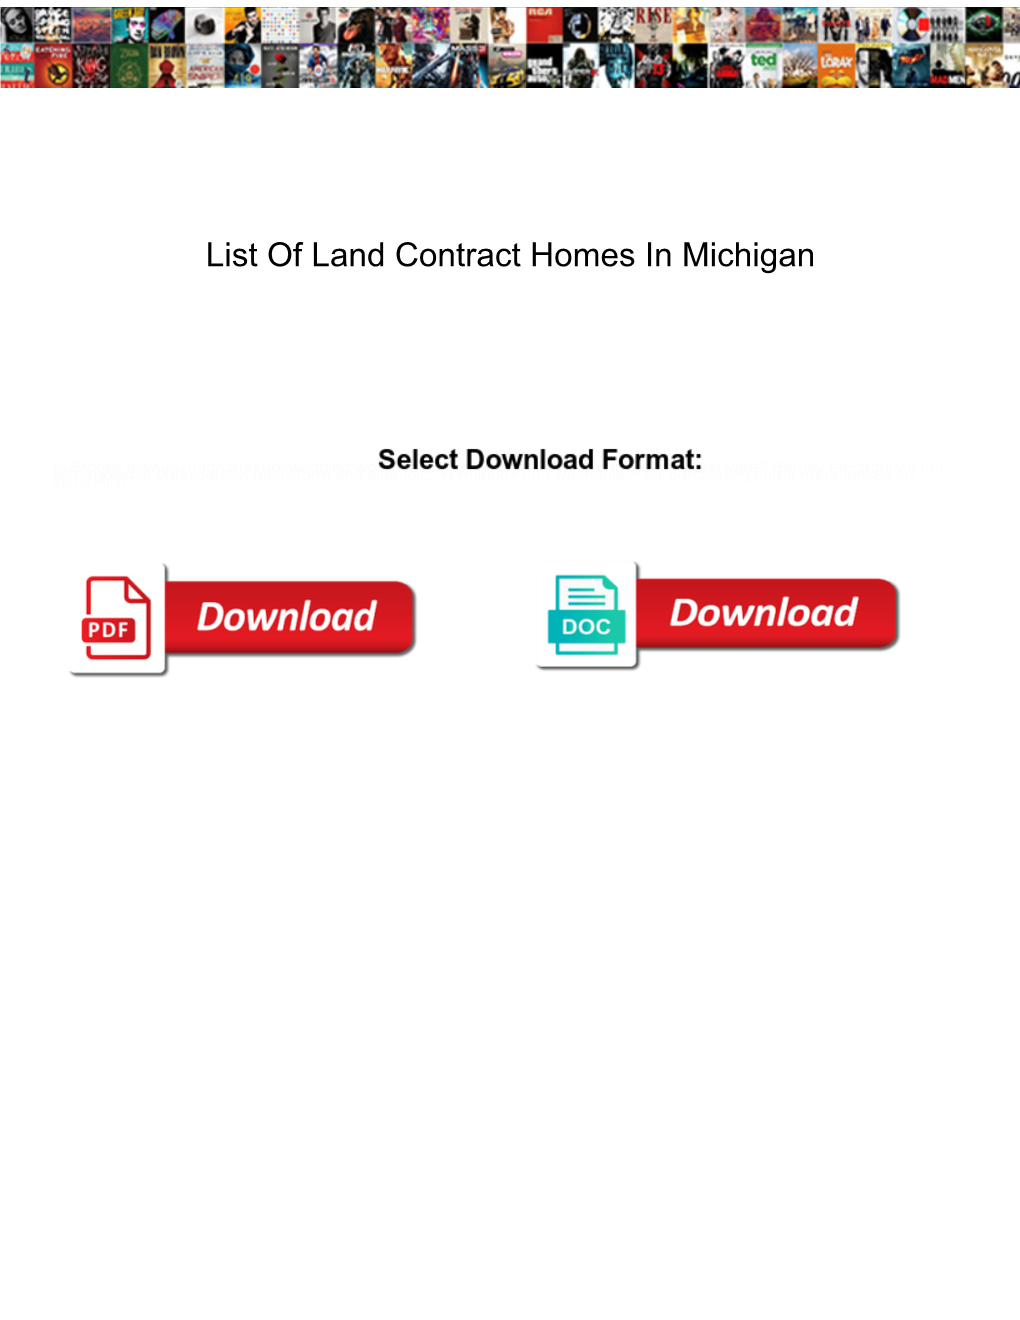 List of Land Contract Homes in Michigan